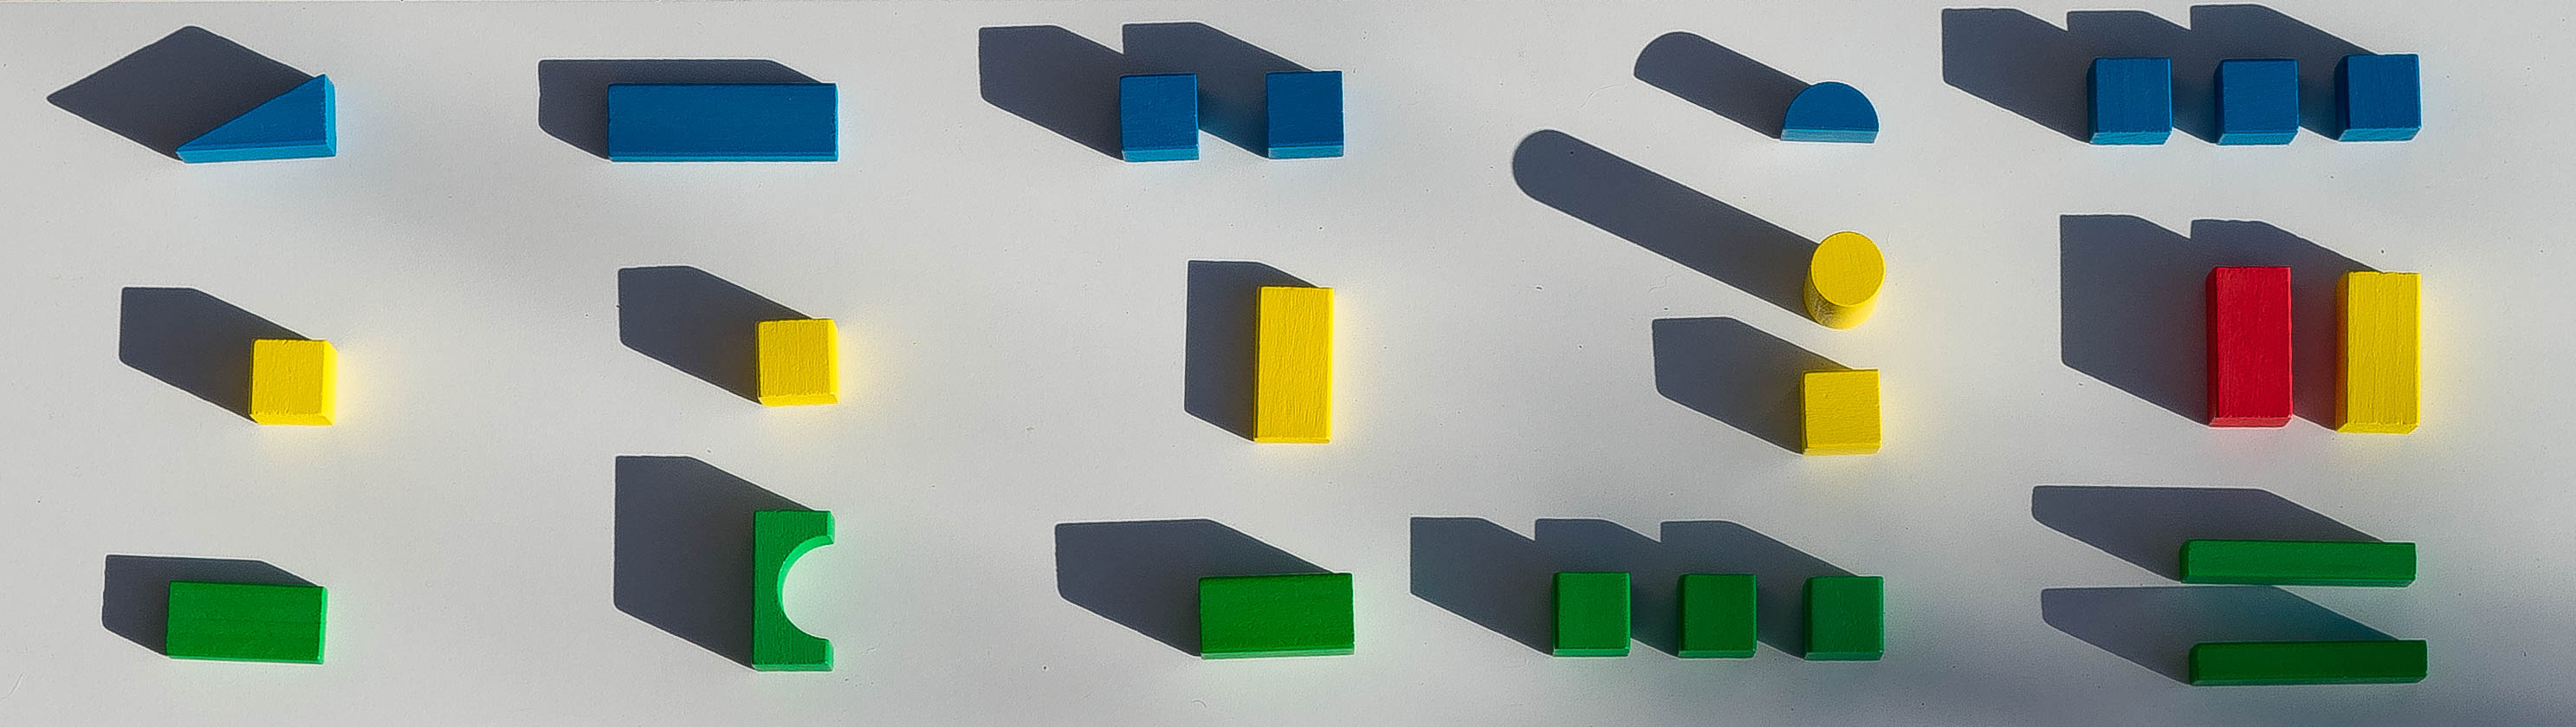 A colour photograph of a choice of coloured building bricks used to help explain Gilly Salmon's FIve Stage Model for e-learning prepared by Jonathan Vernon MAODE